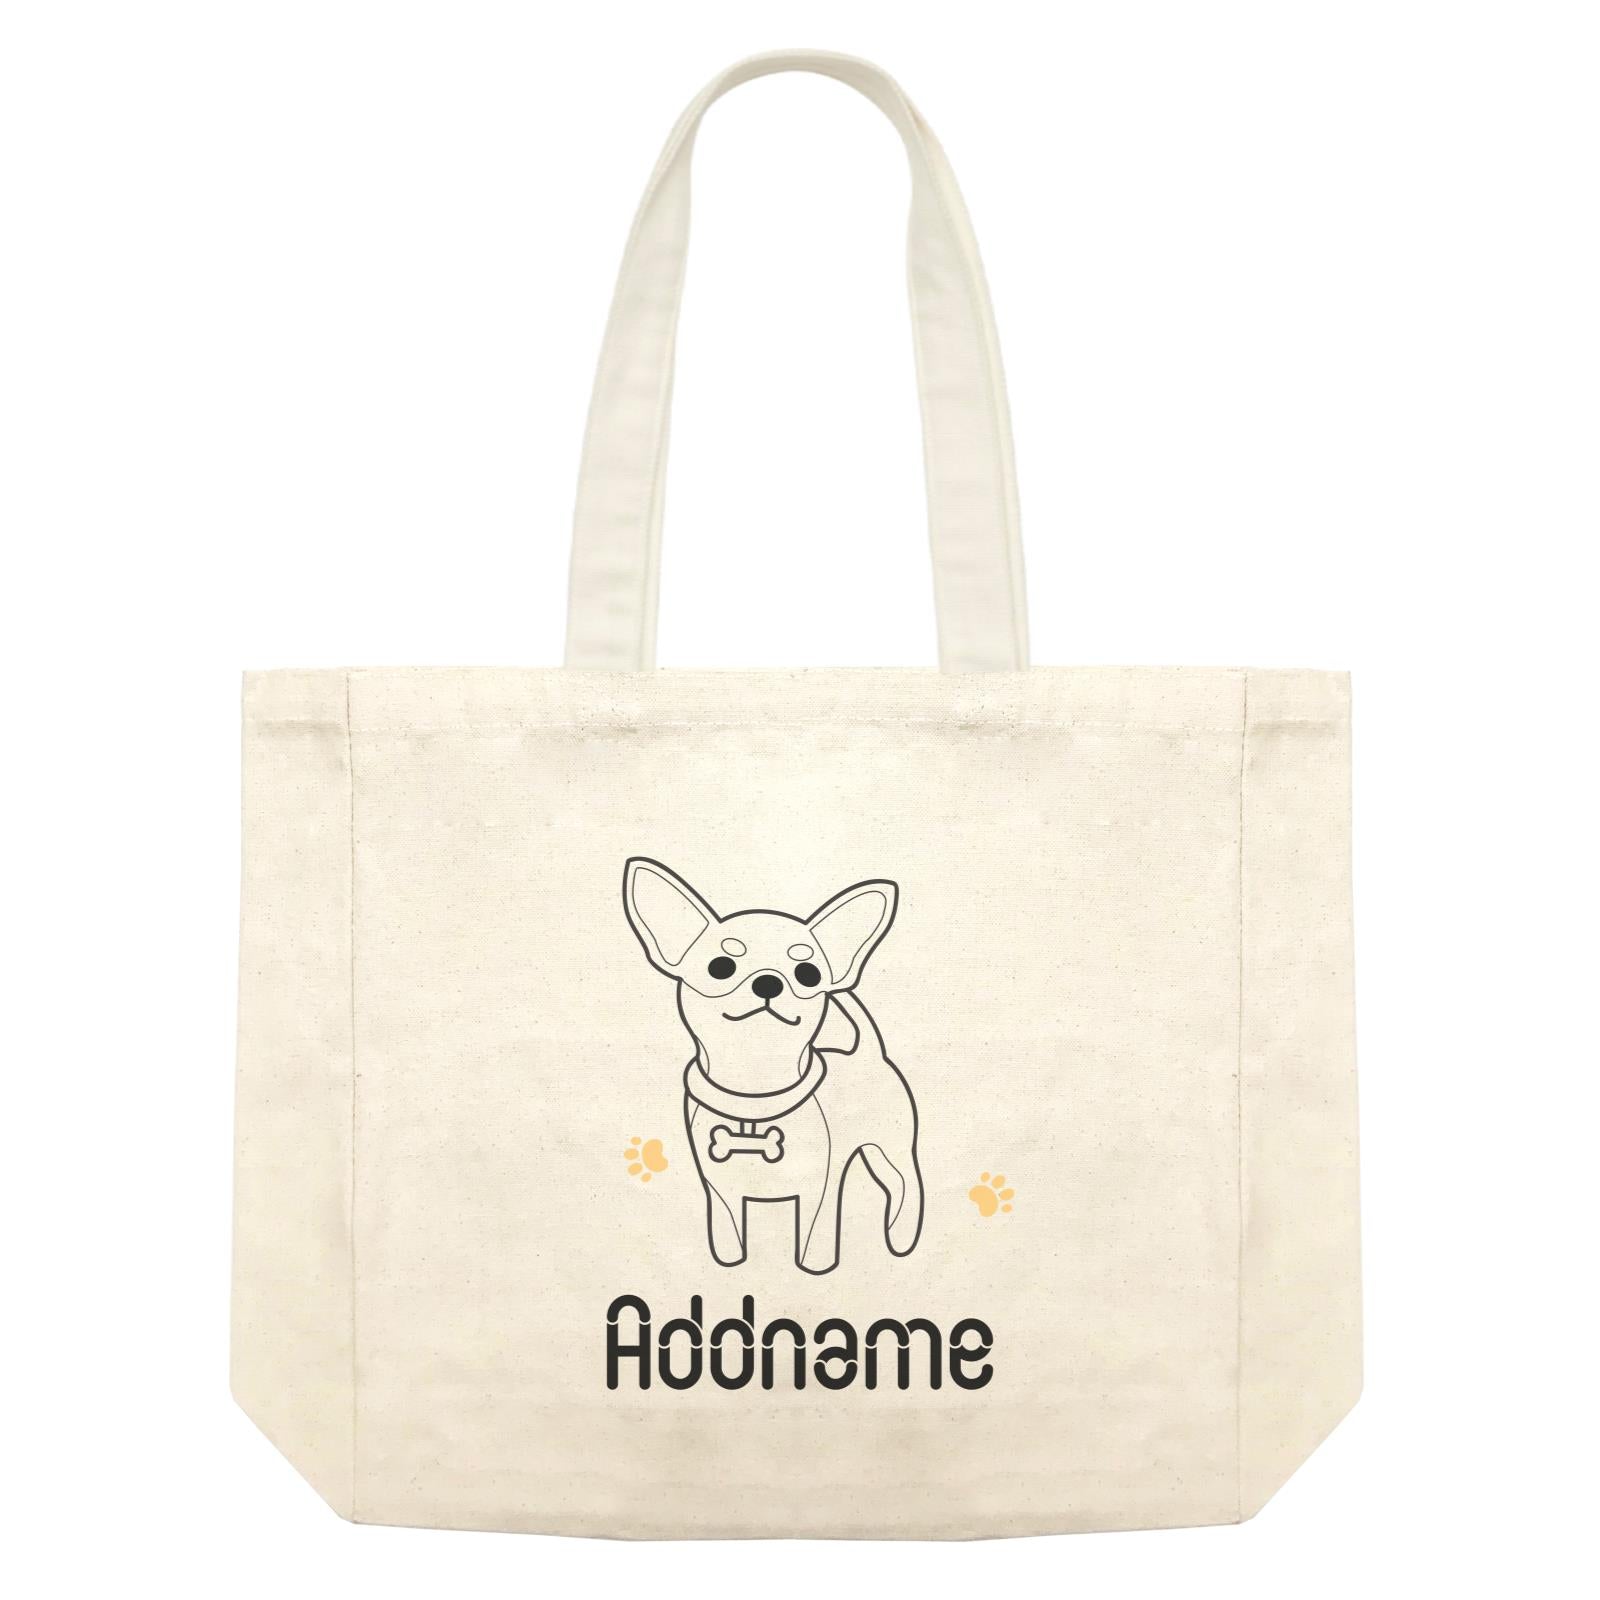 Coloring Outline Cute Hand Drawn Animals Dogs Chihuahua Addname Shopping Bag